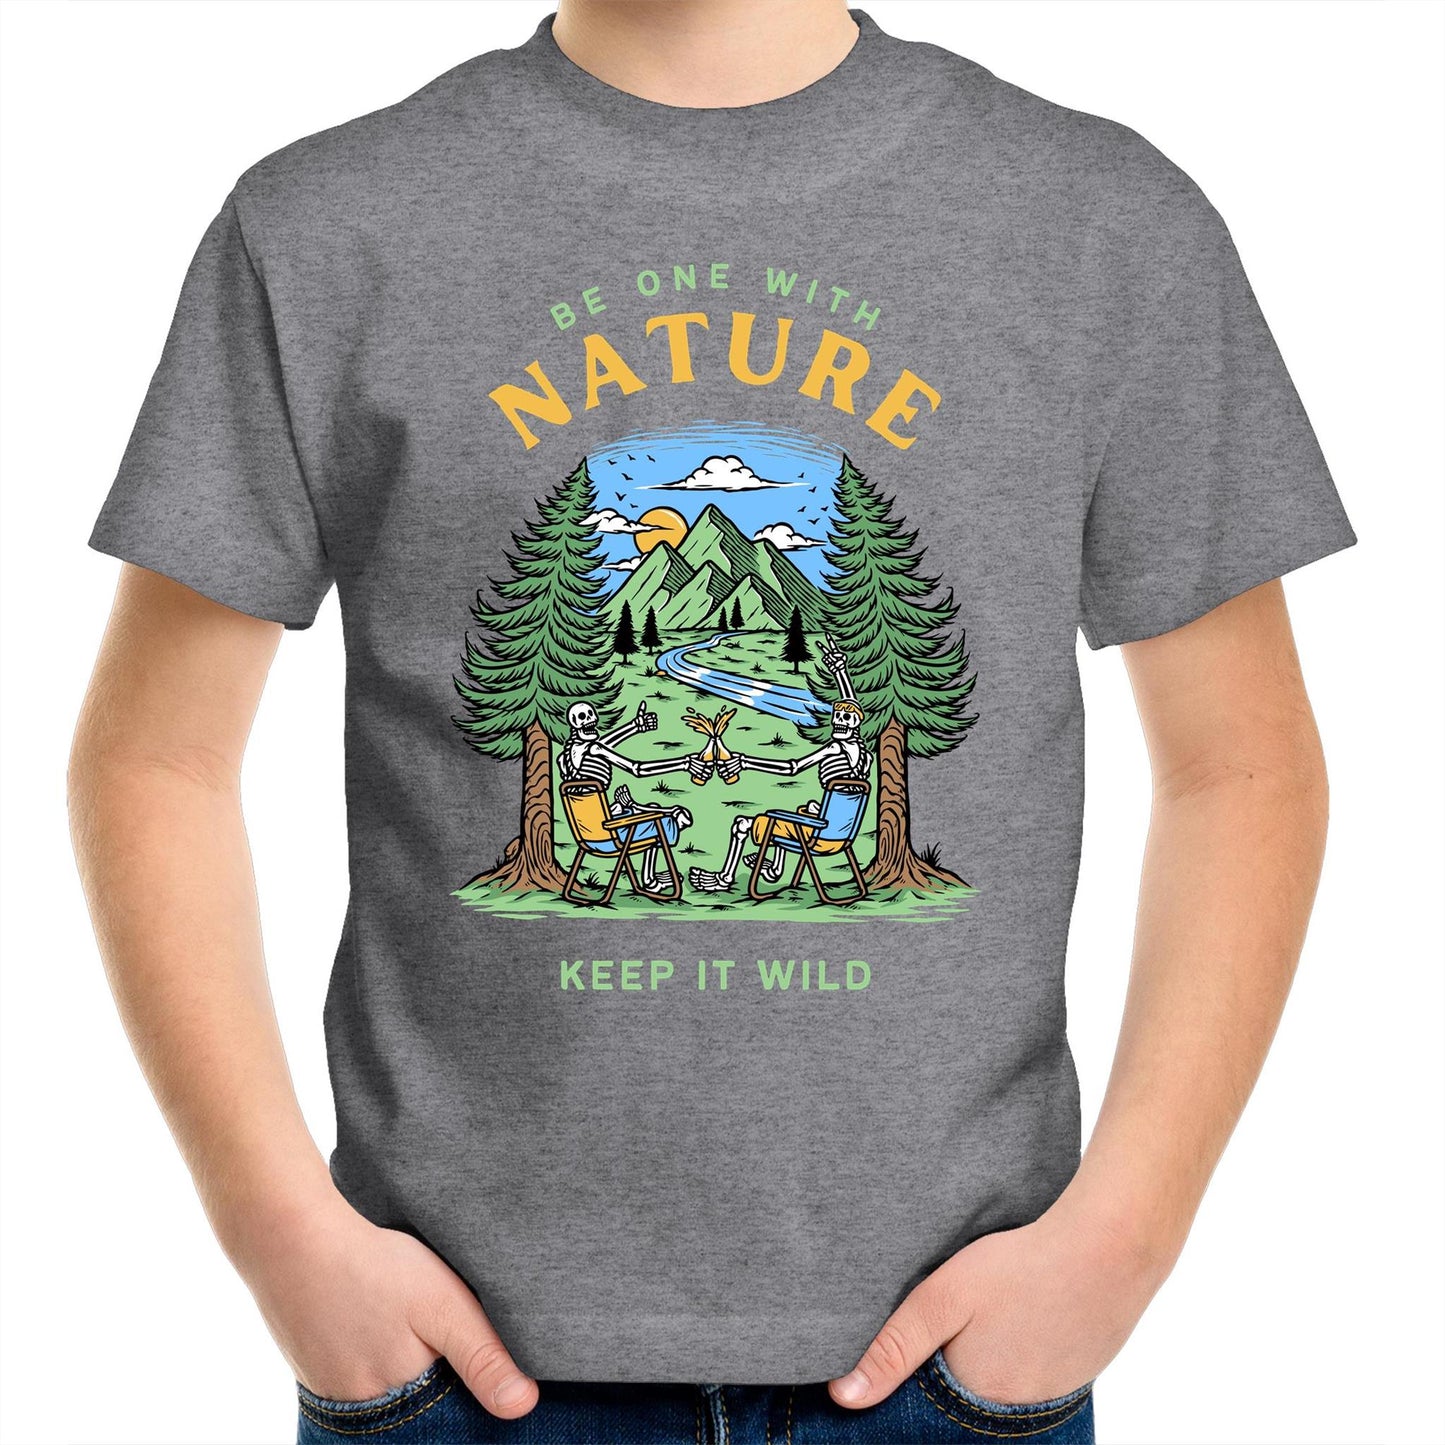 Be One With Nature, Skeleton - Kids Youth T-Shirt Grey Marle Kids Youth T-shirt Environment Summer